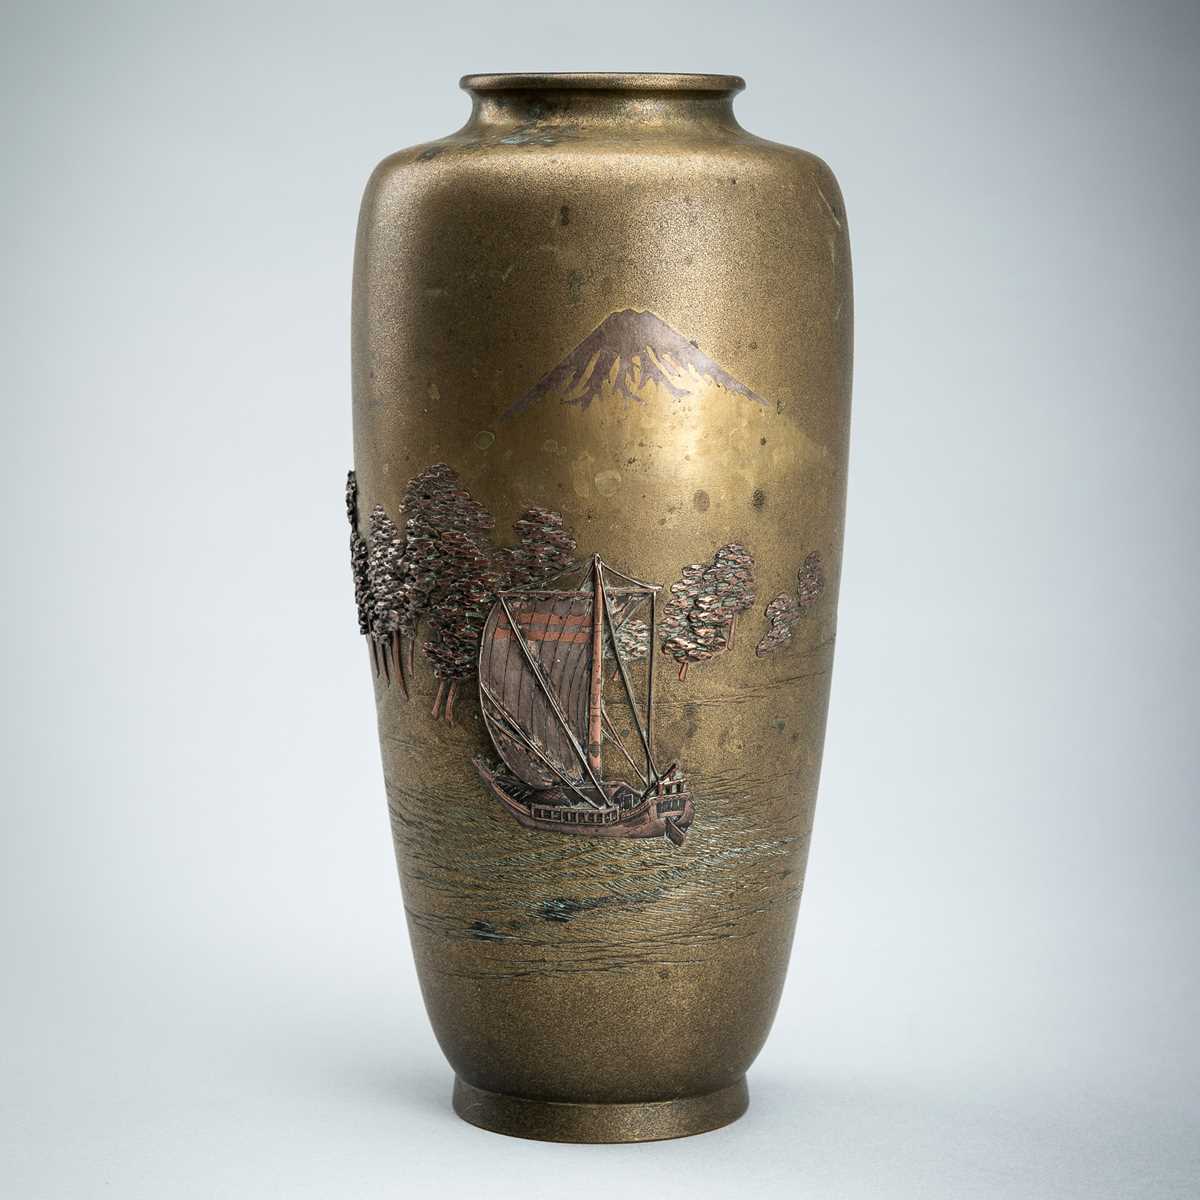 Lot 83 - ATSUYOSHI: A SILVER AND COPPER-INLAID BRONZE BALUSTER VASE DEPICTING A COASTLINE WITH MOUNT FUJI, MEIJI PERIOD